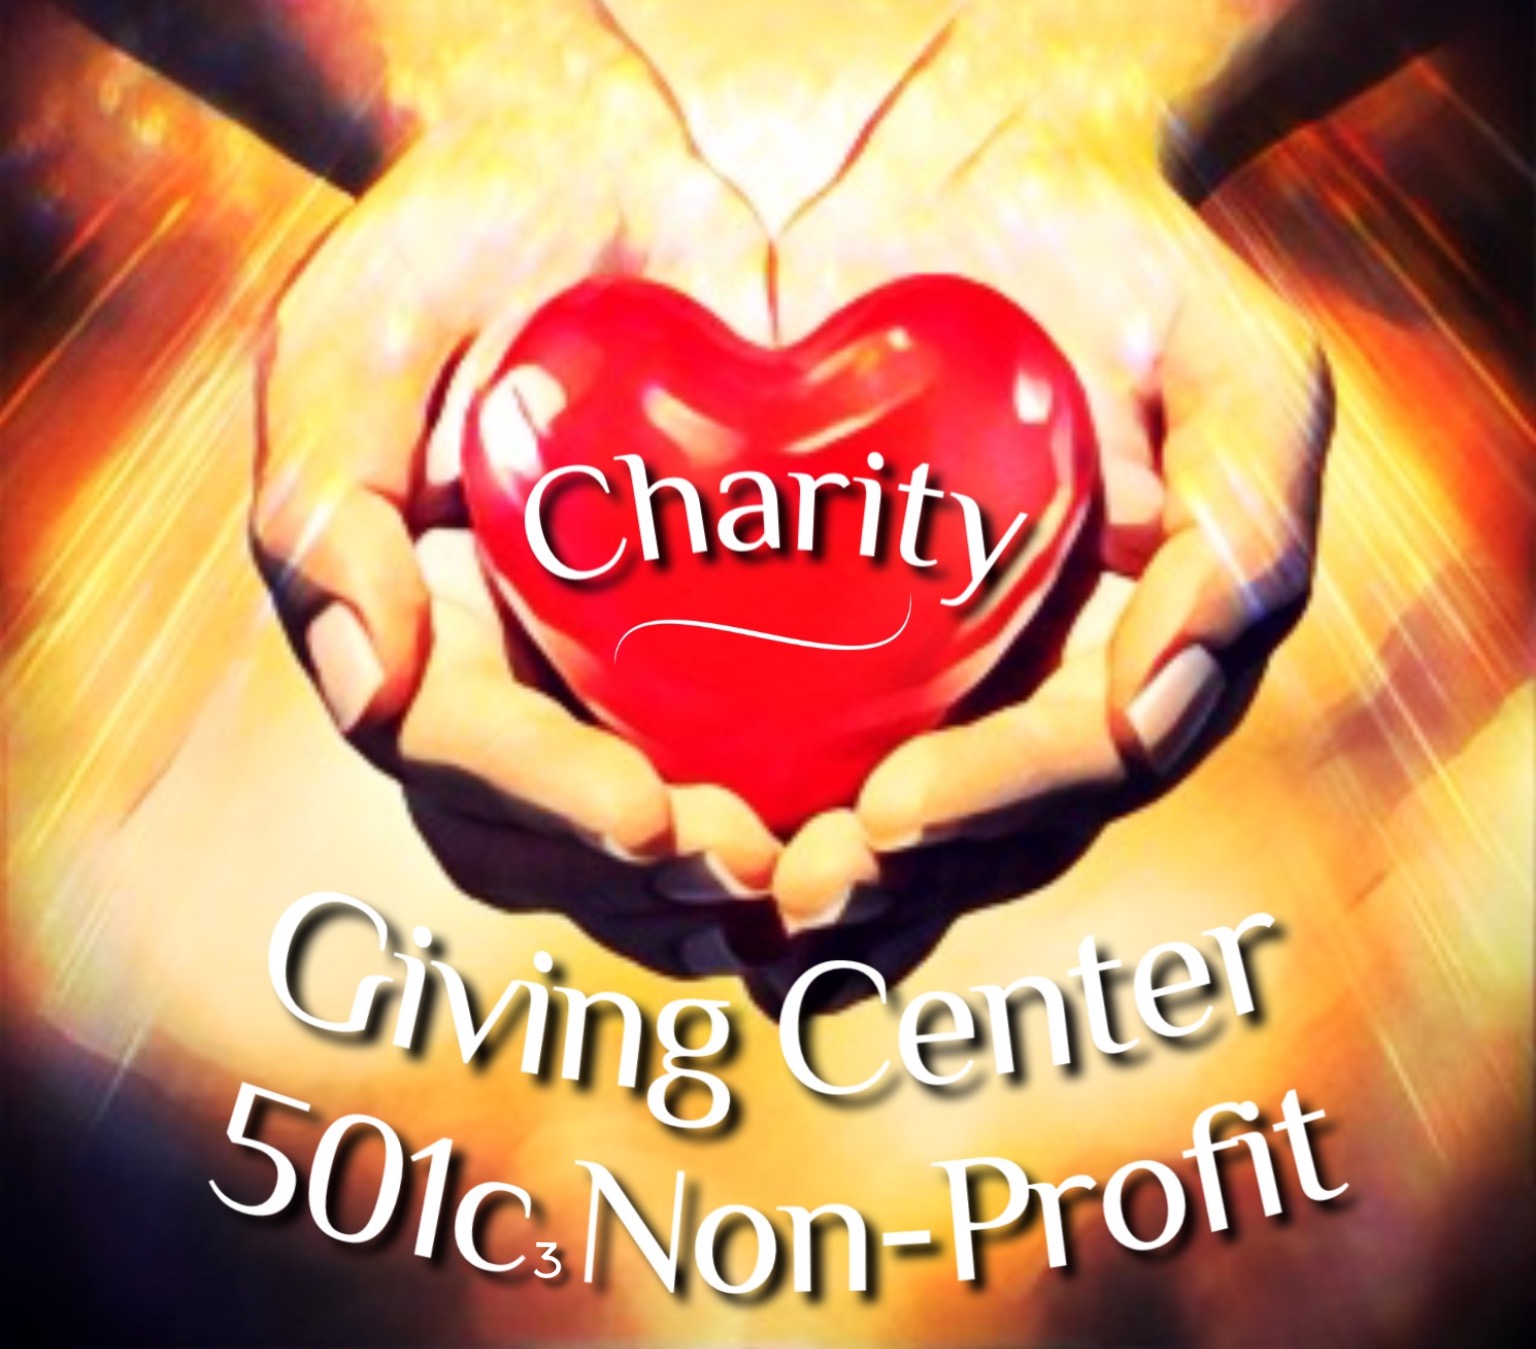 tax-deductible-charitable-donations-what-can-you-donate-to-charity